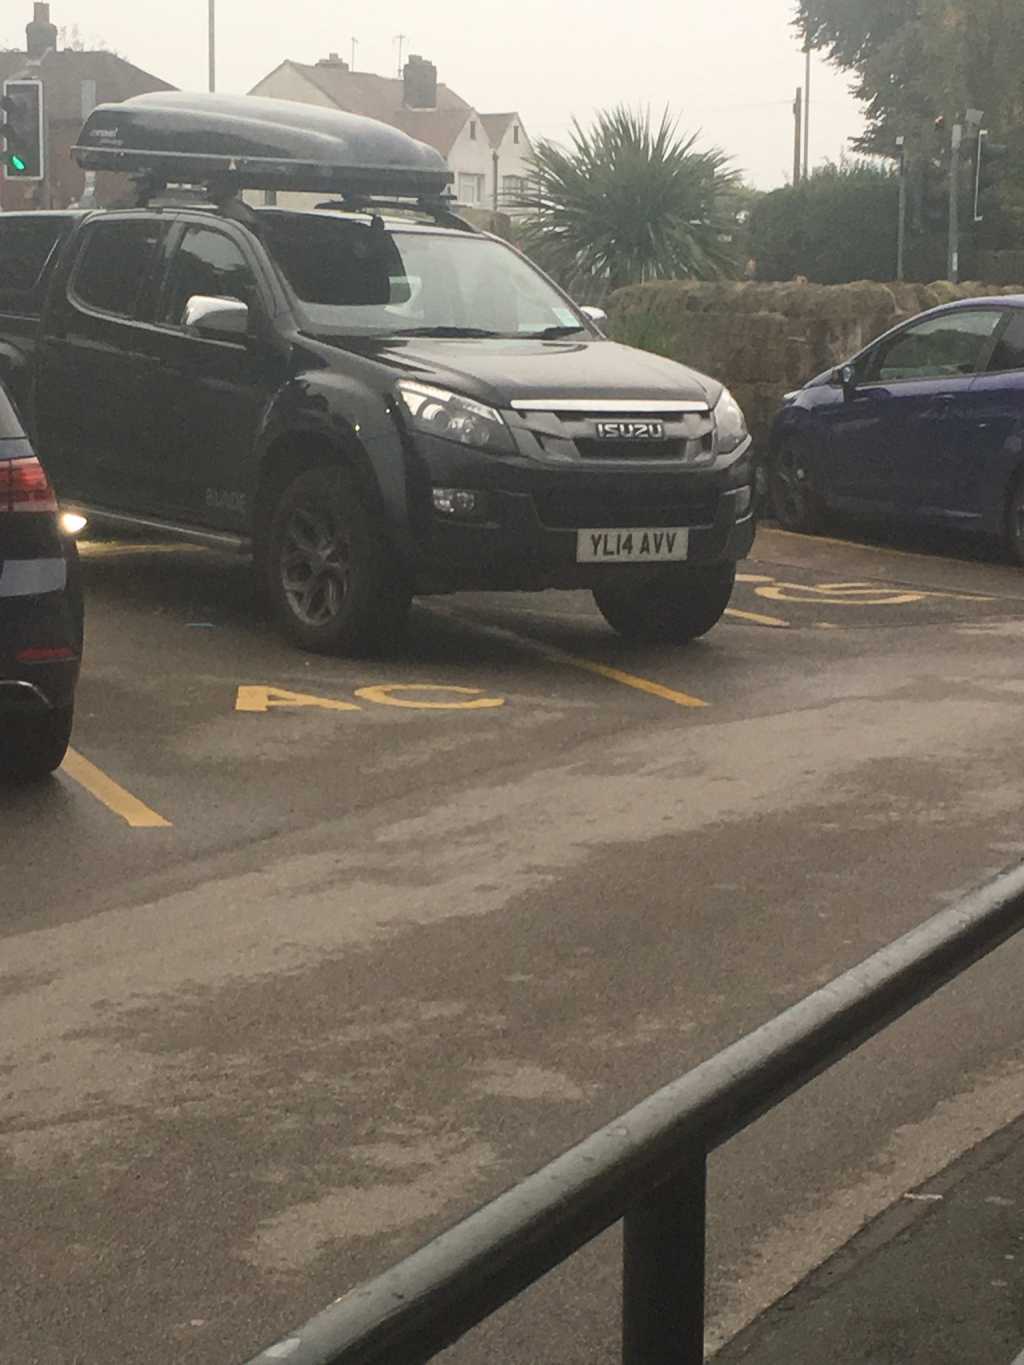 YL14 AVV is a crap parker